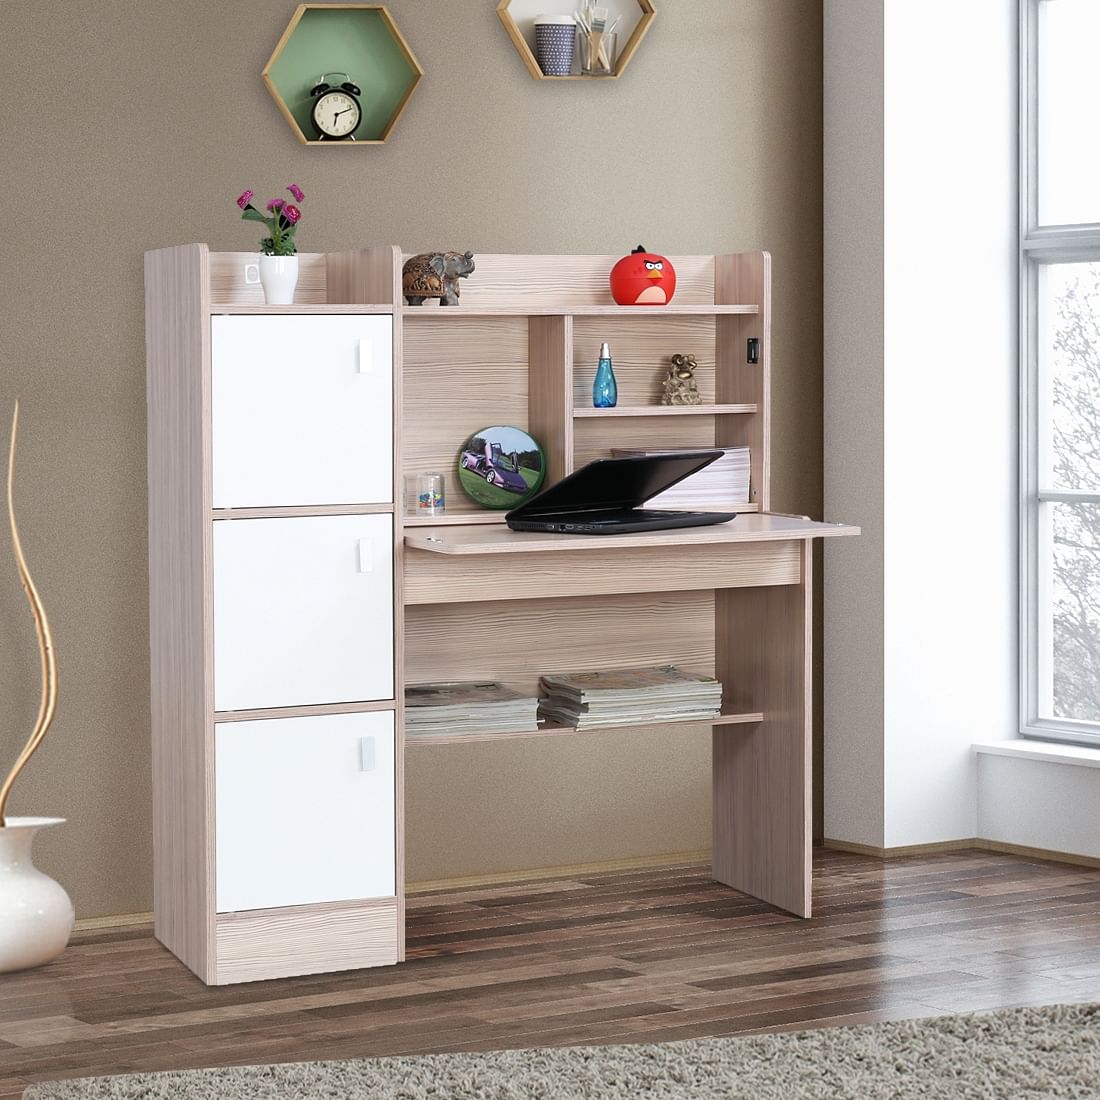 Buy Ace Engineered Wood Study Table in White Colour Online at Best ...